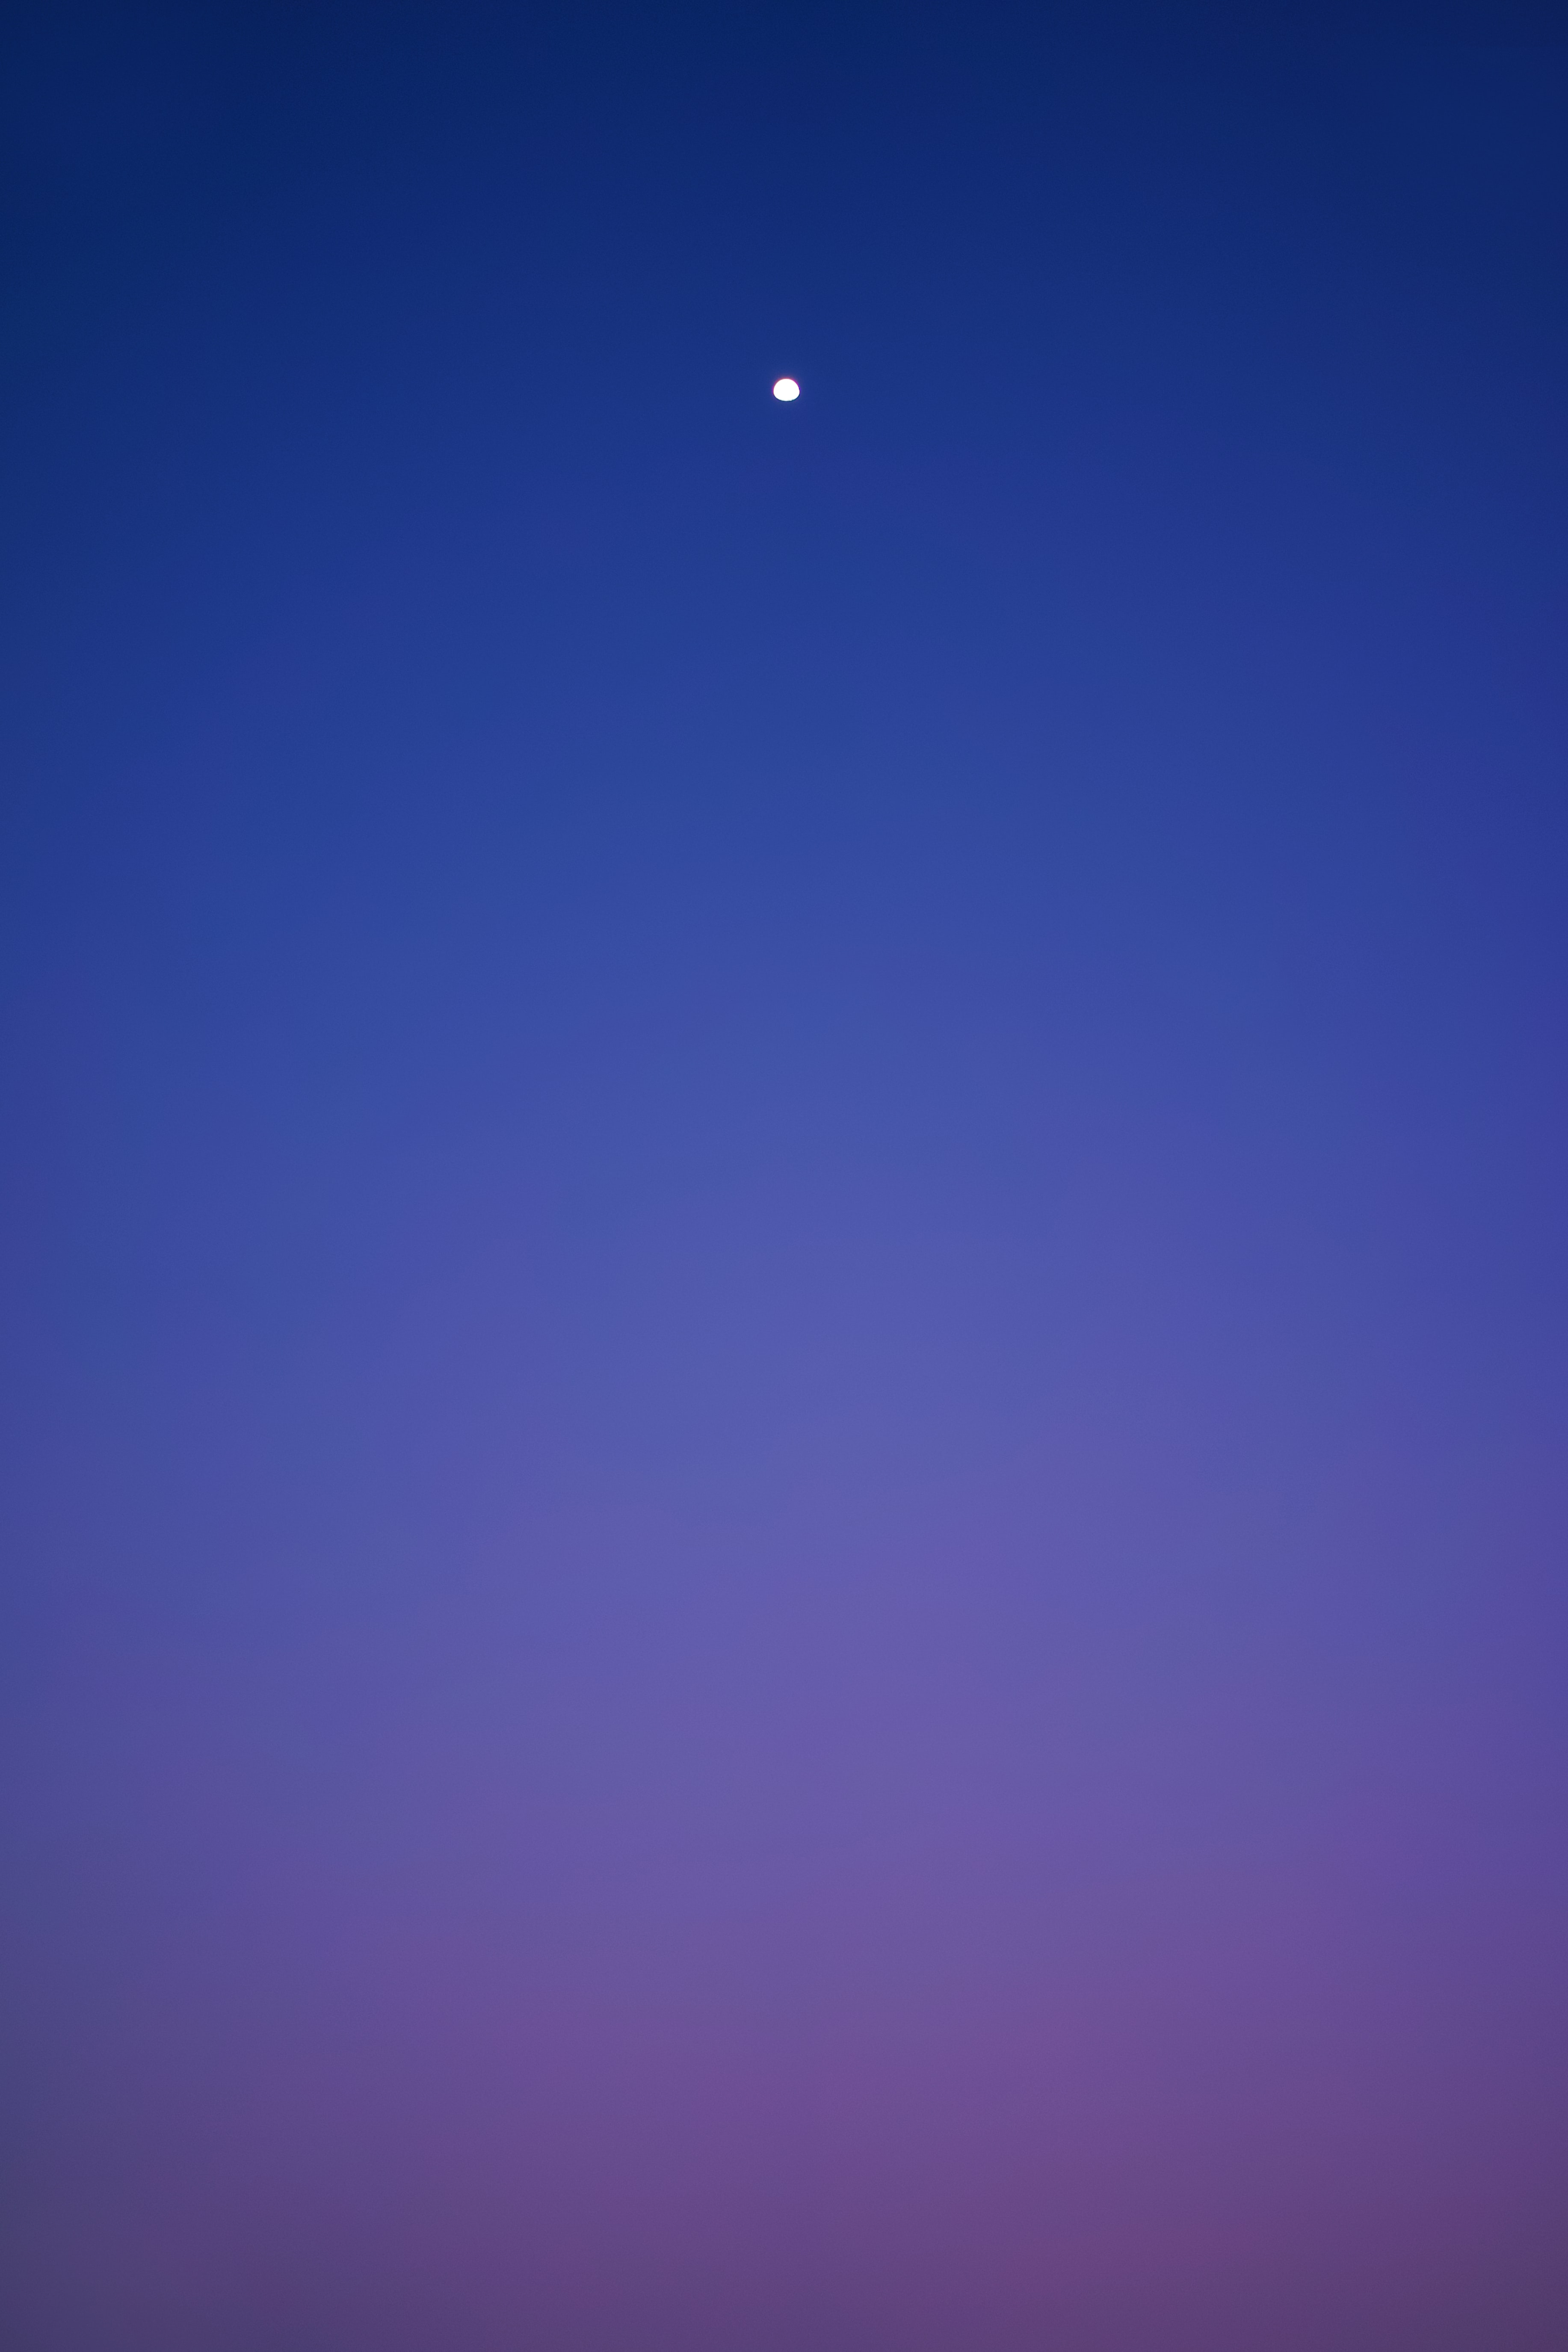 Wallpaper for mobile devices minimalism, evening, moon, sky